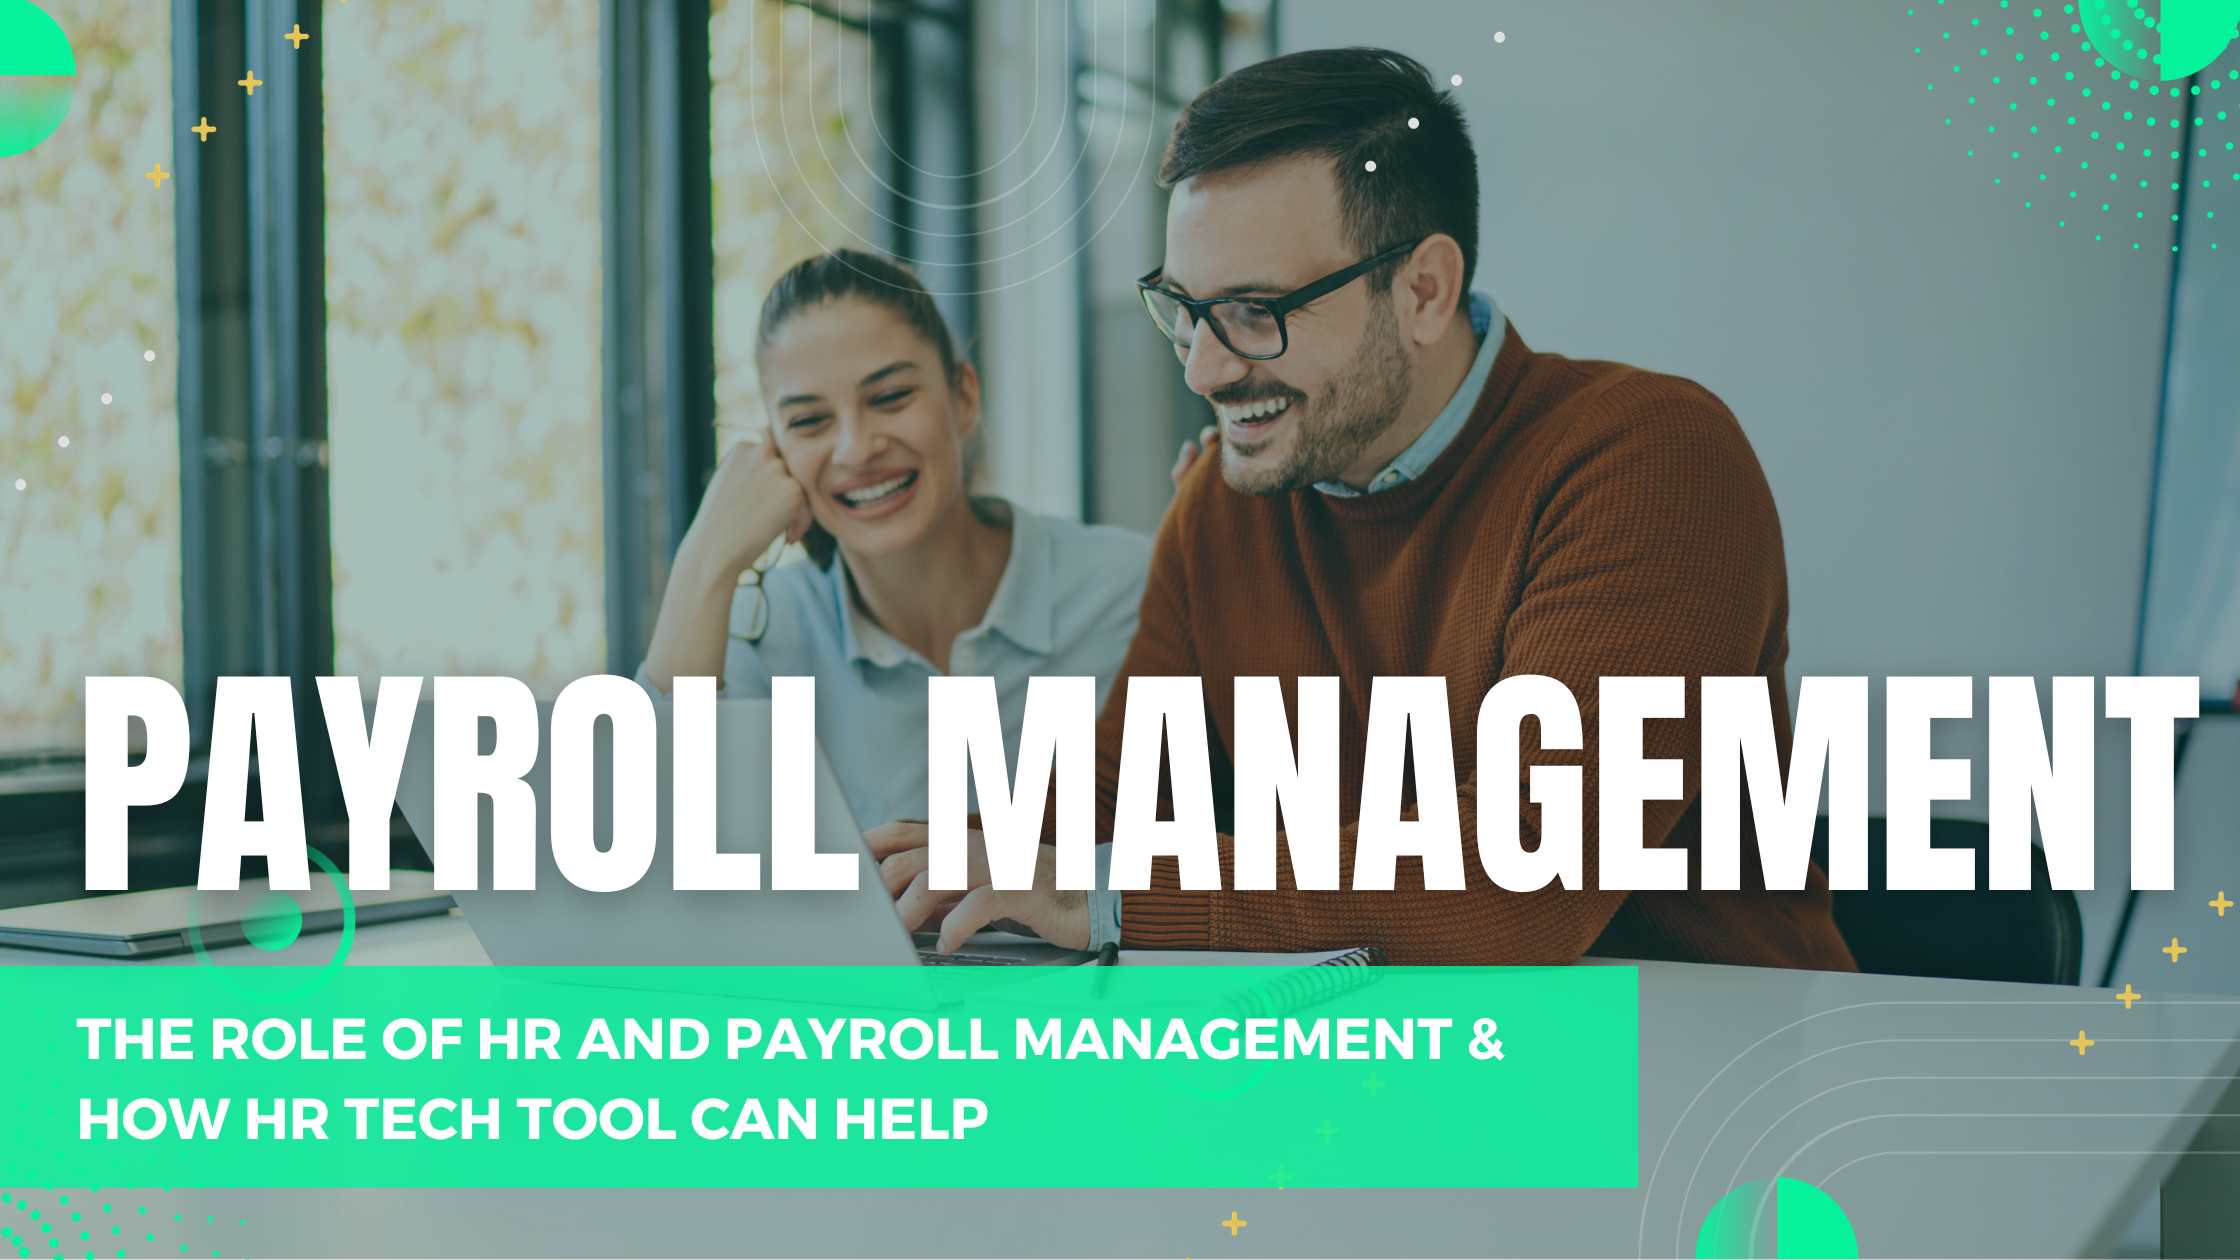 HR and payroll management tool